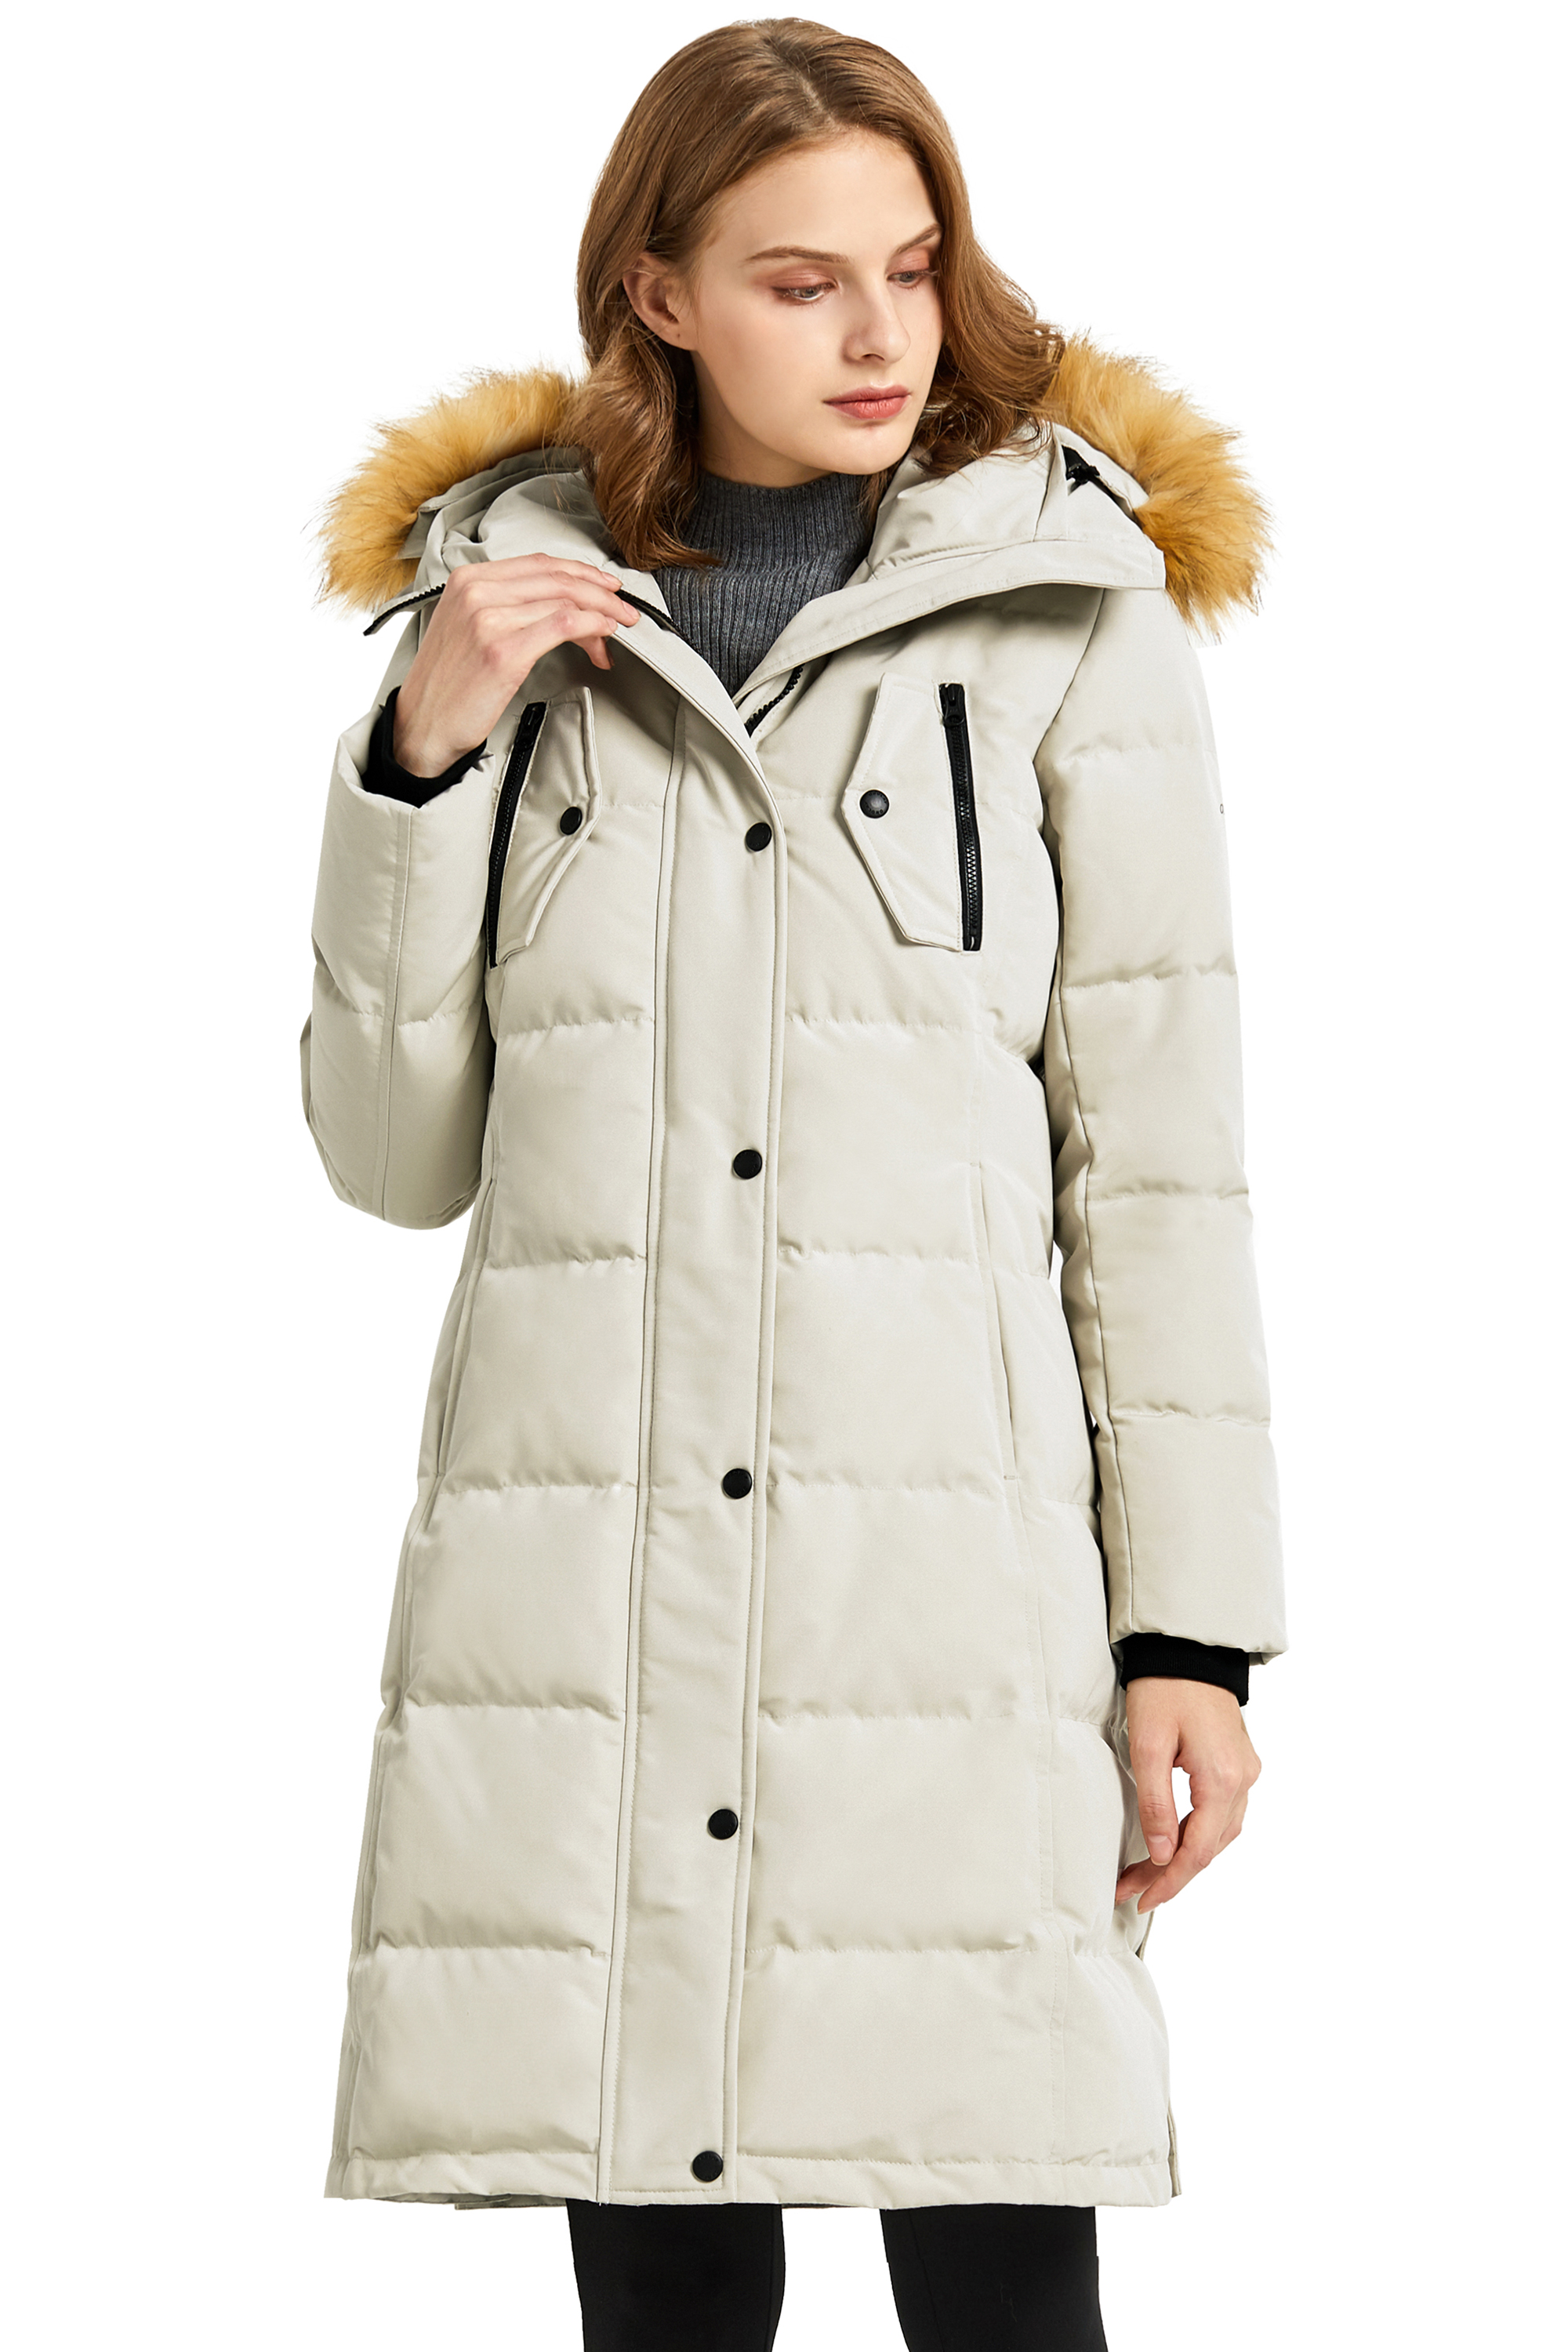 Orolay Women's Down Jacket Winter Long Coat Windproof Puffer Jacket with Fur Hood - image 1 of 5